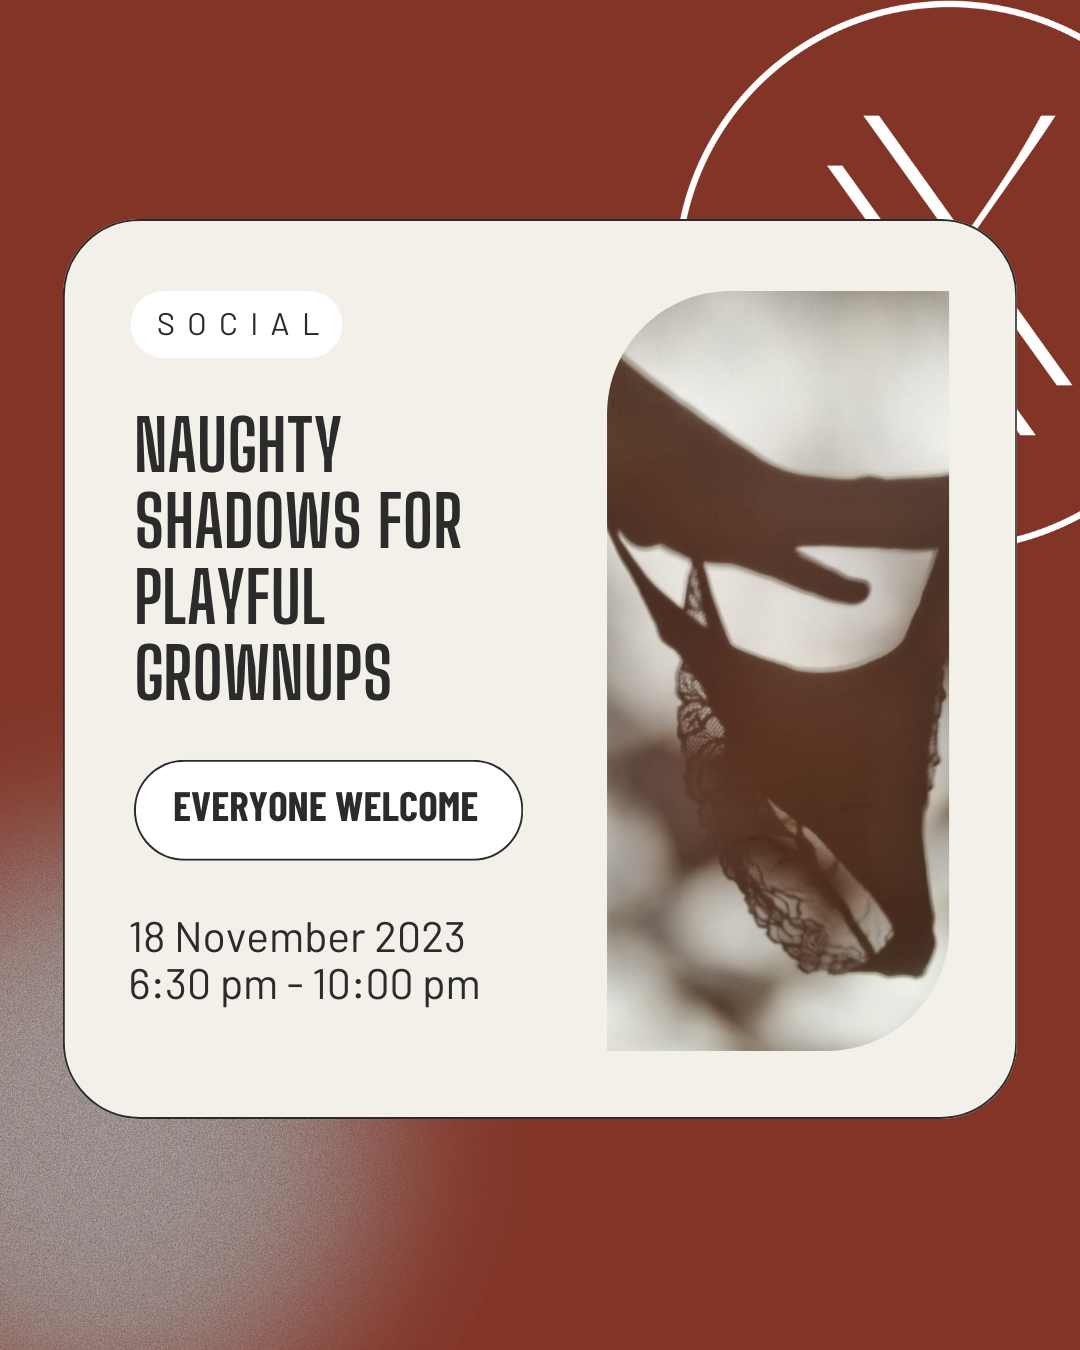 2023-11-18-naughty-shadows-for-playful-grownps/